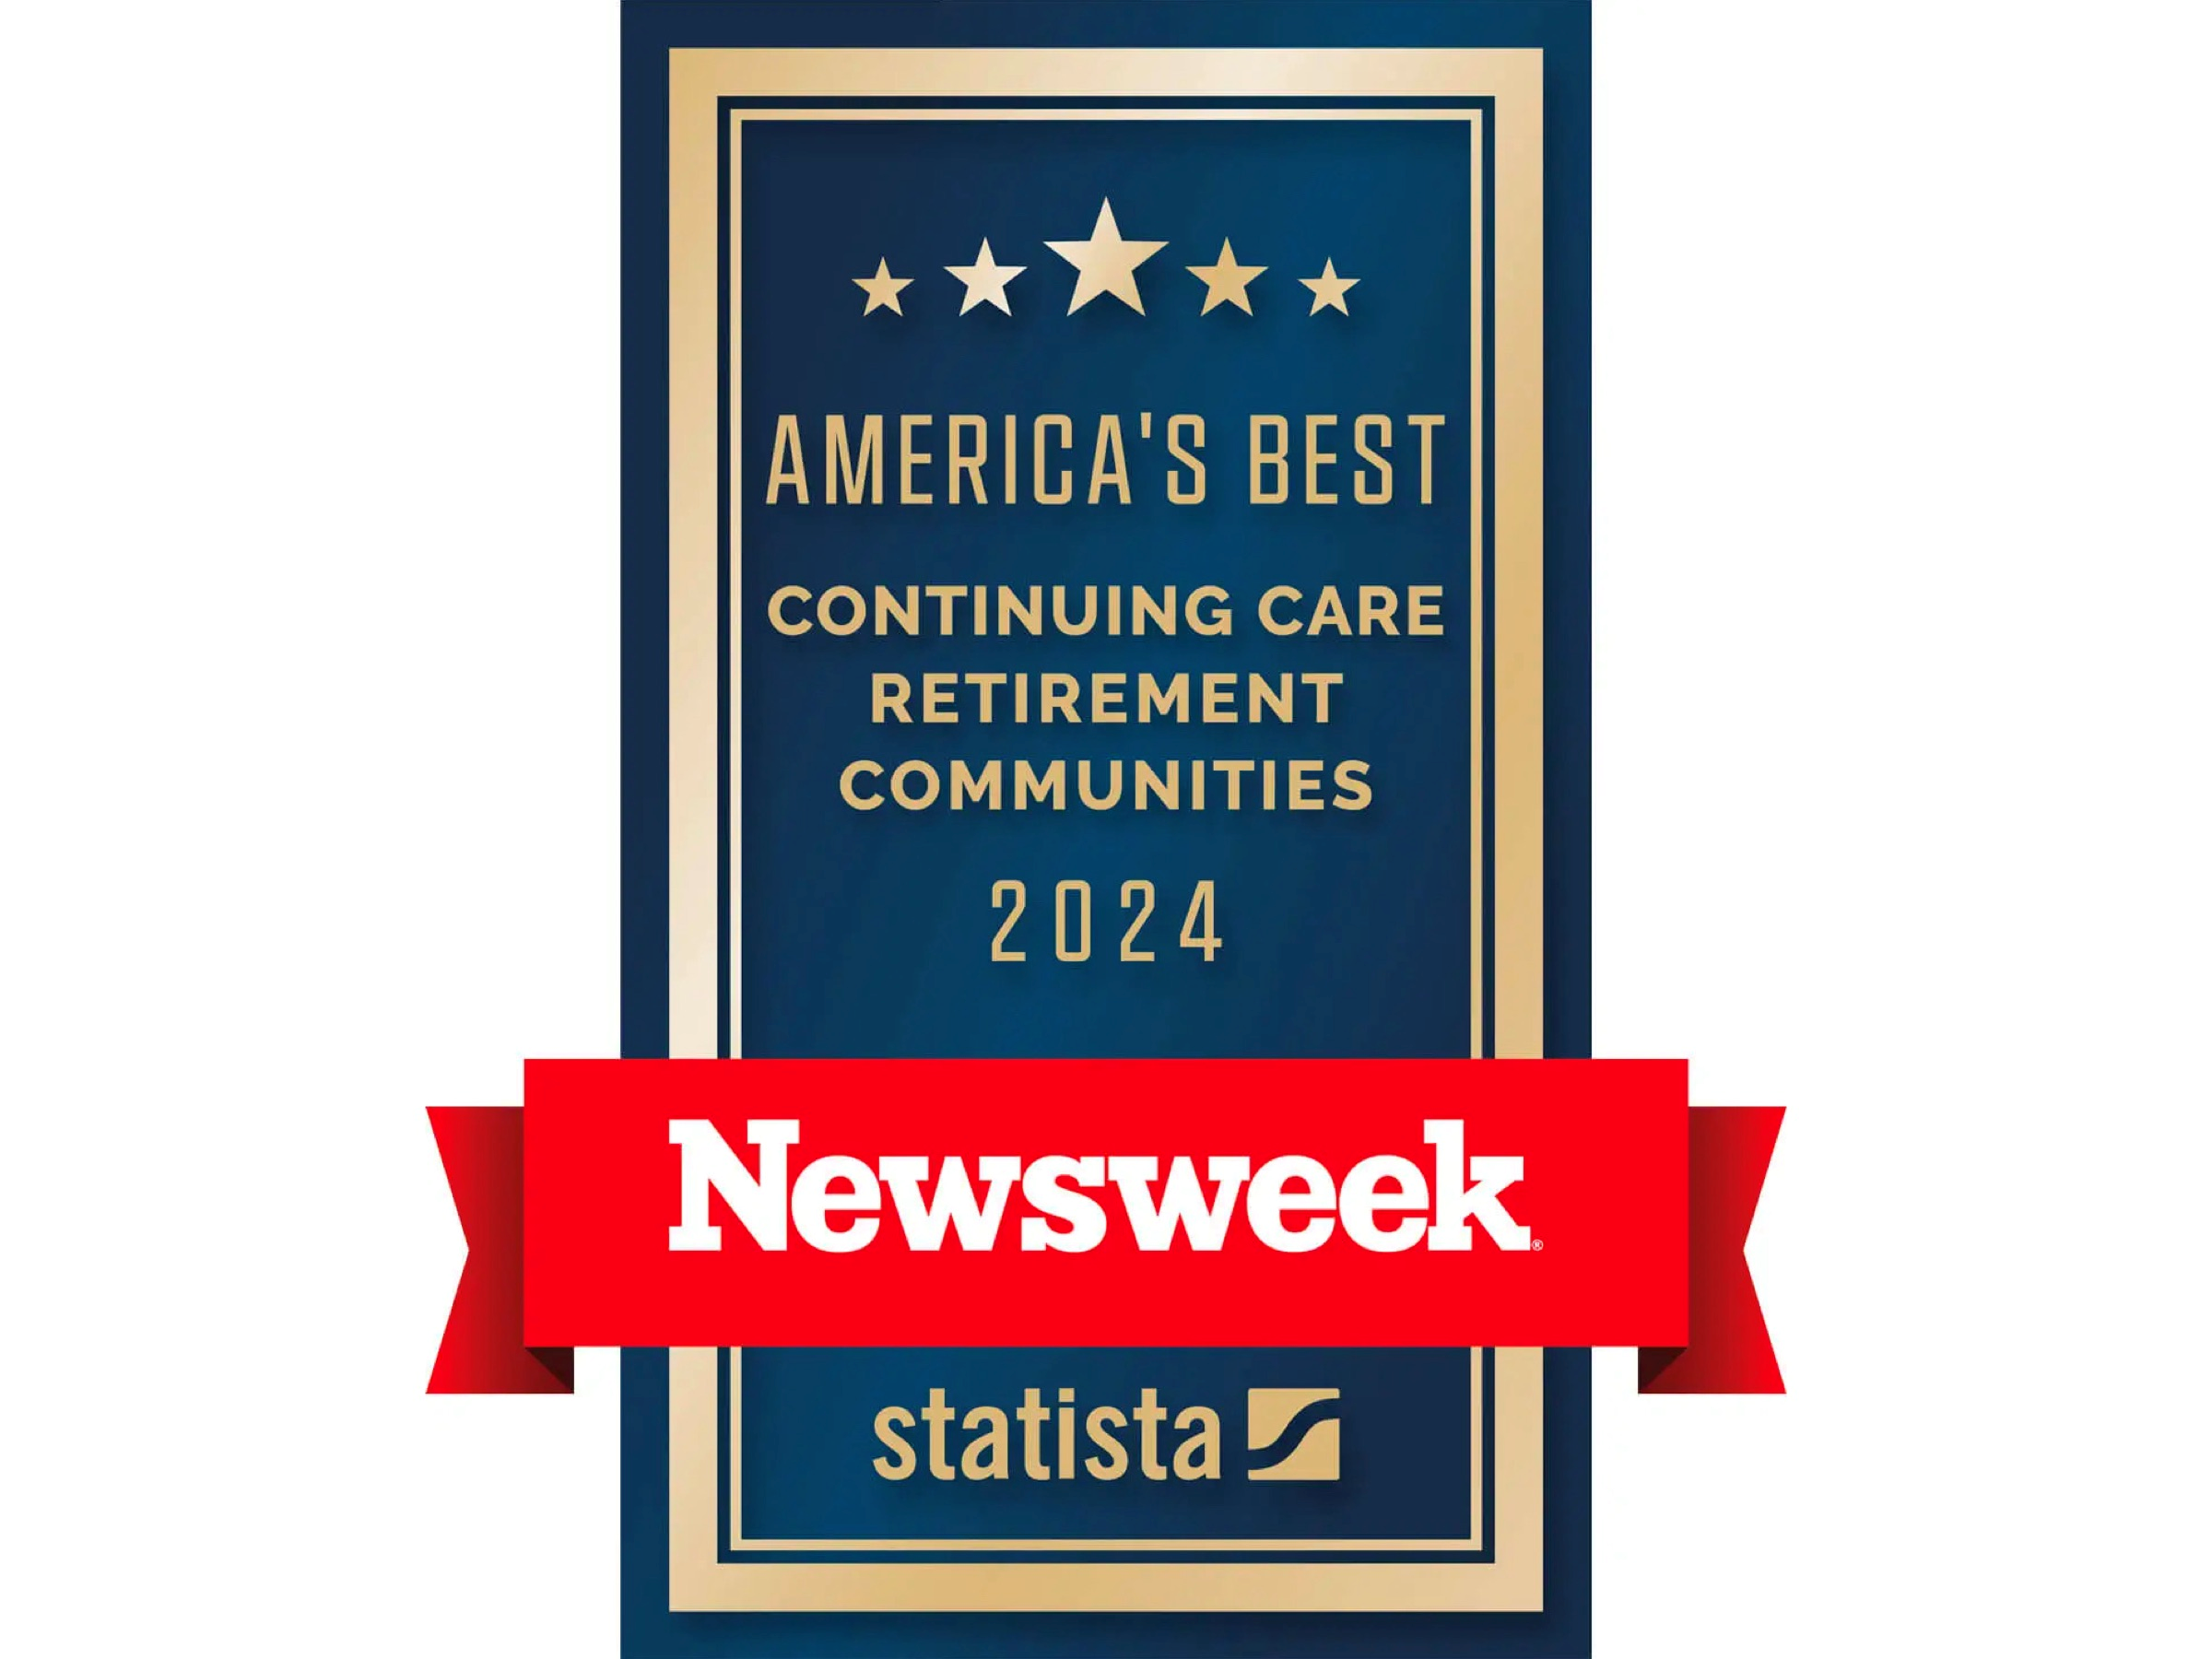 Newsweek's Award for America's Best Continuing Care Retirement Community 2024.